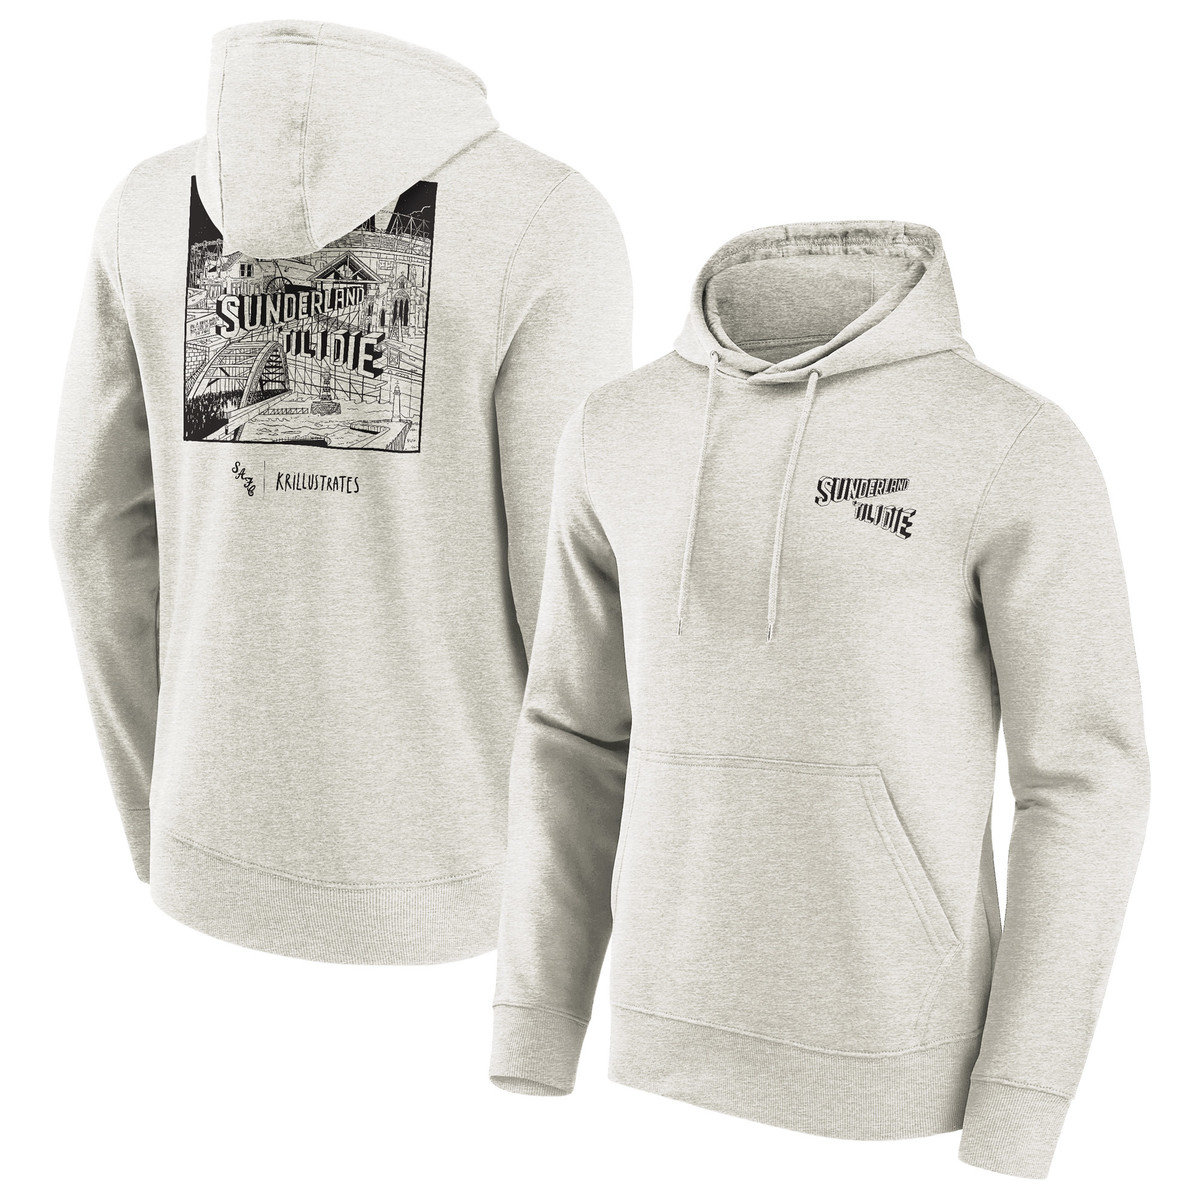 Buy the STID GREY GRAPHIC HOODIE online at Sunderland AFC Store